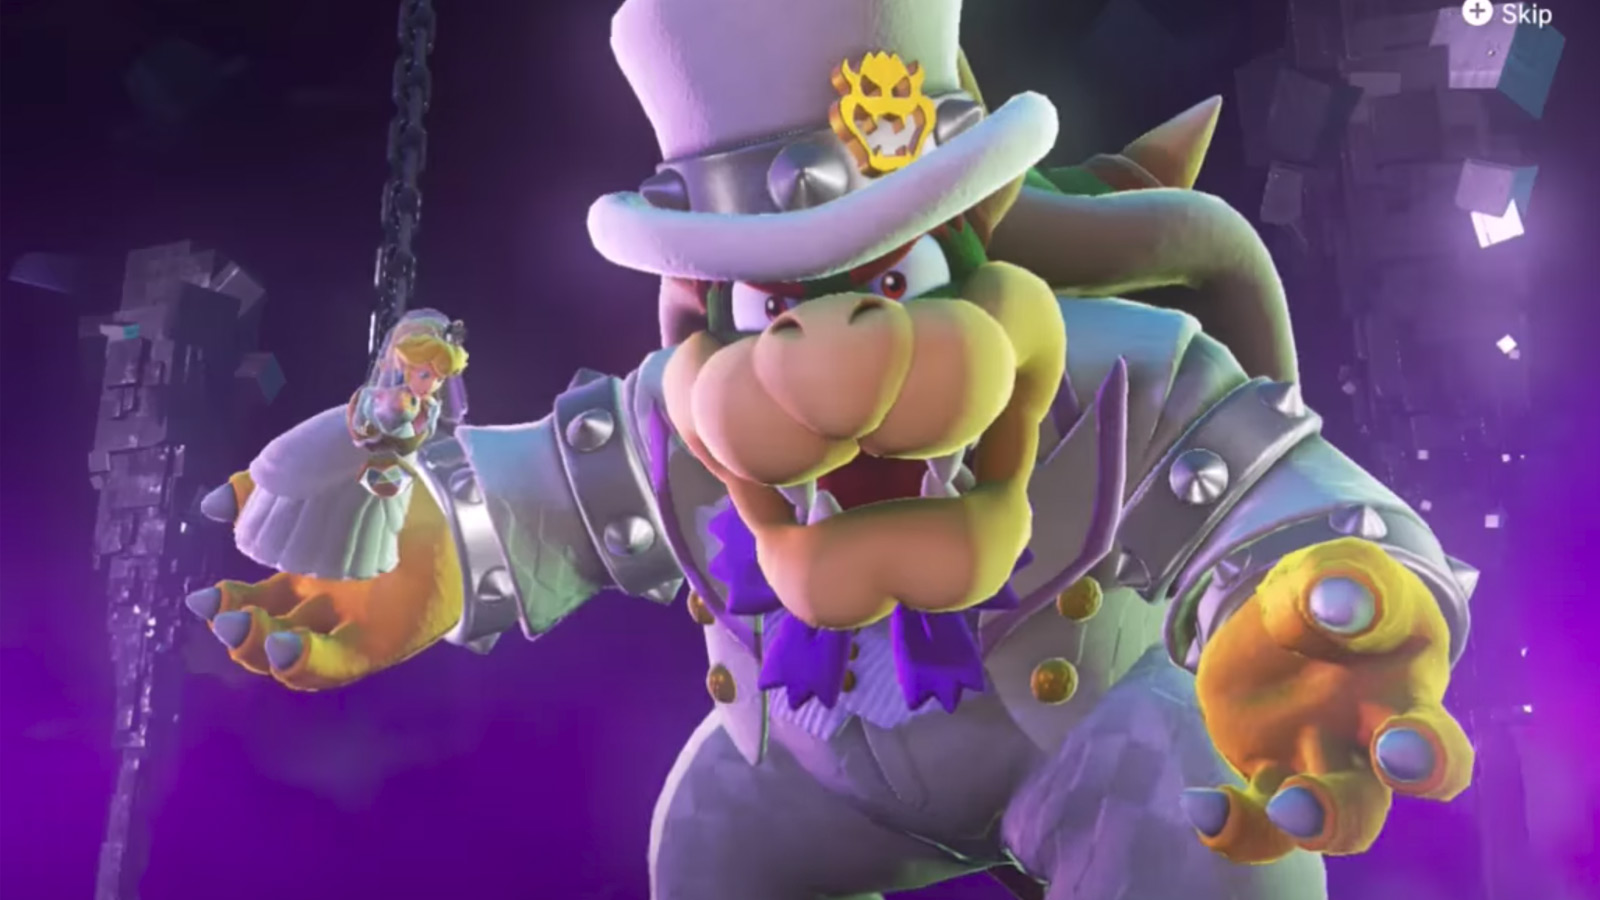 The Best Super Mario Odyssey Moment: Capturing Bowser